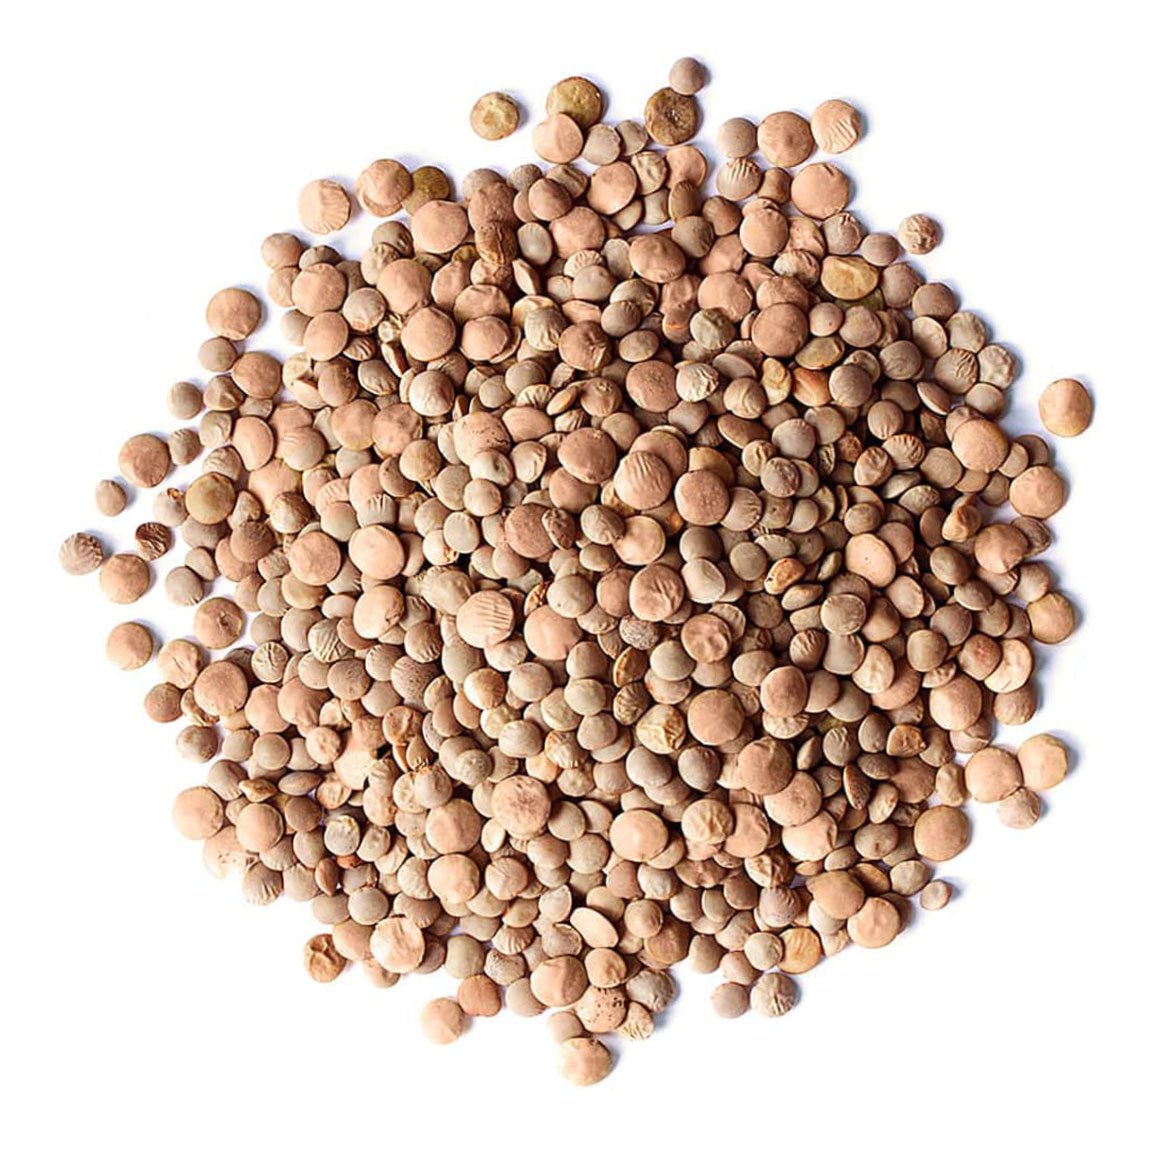 Organic-Red-Lentils-Whole-min-upd